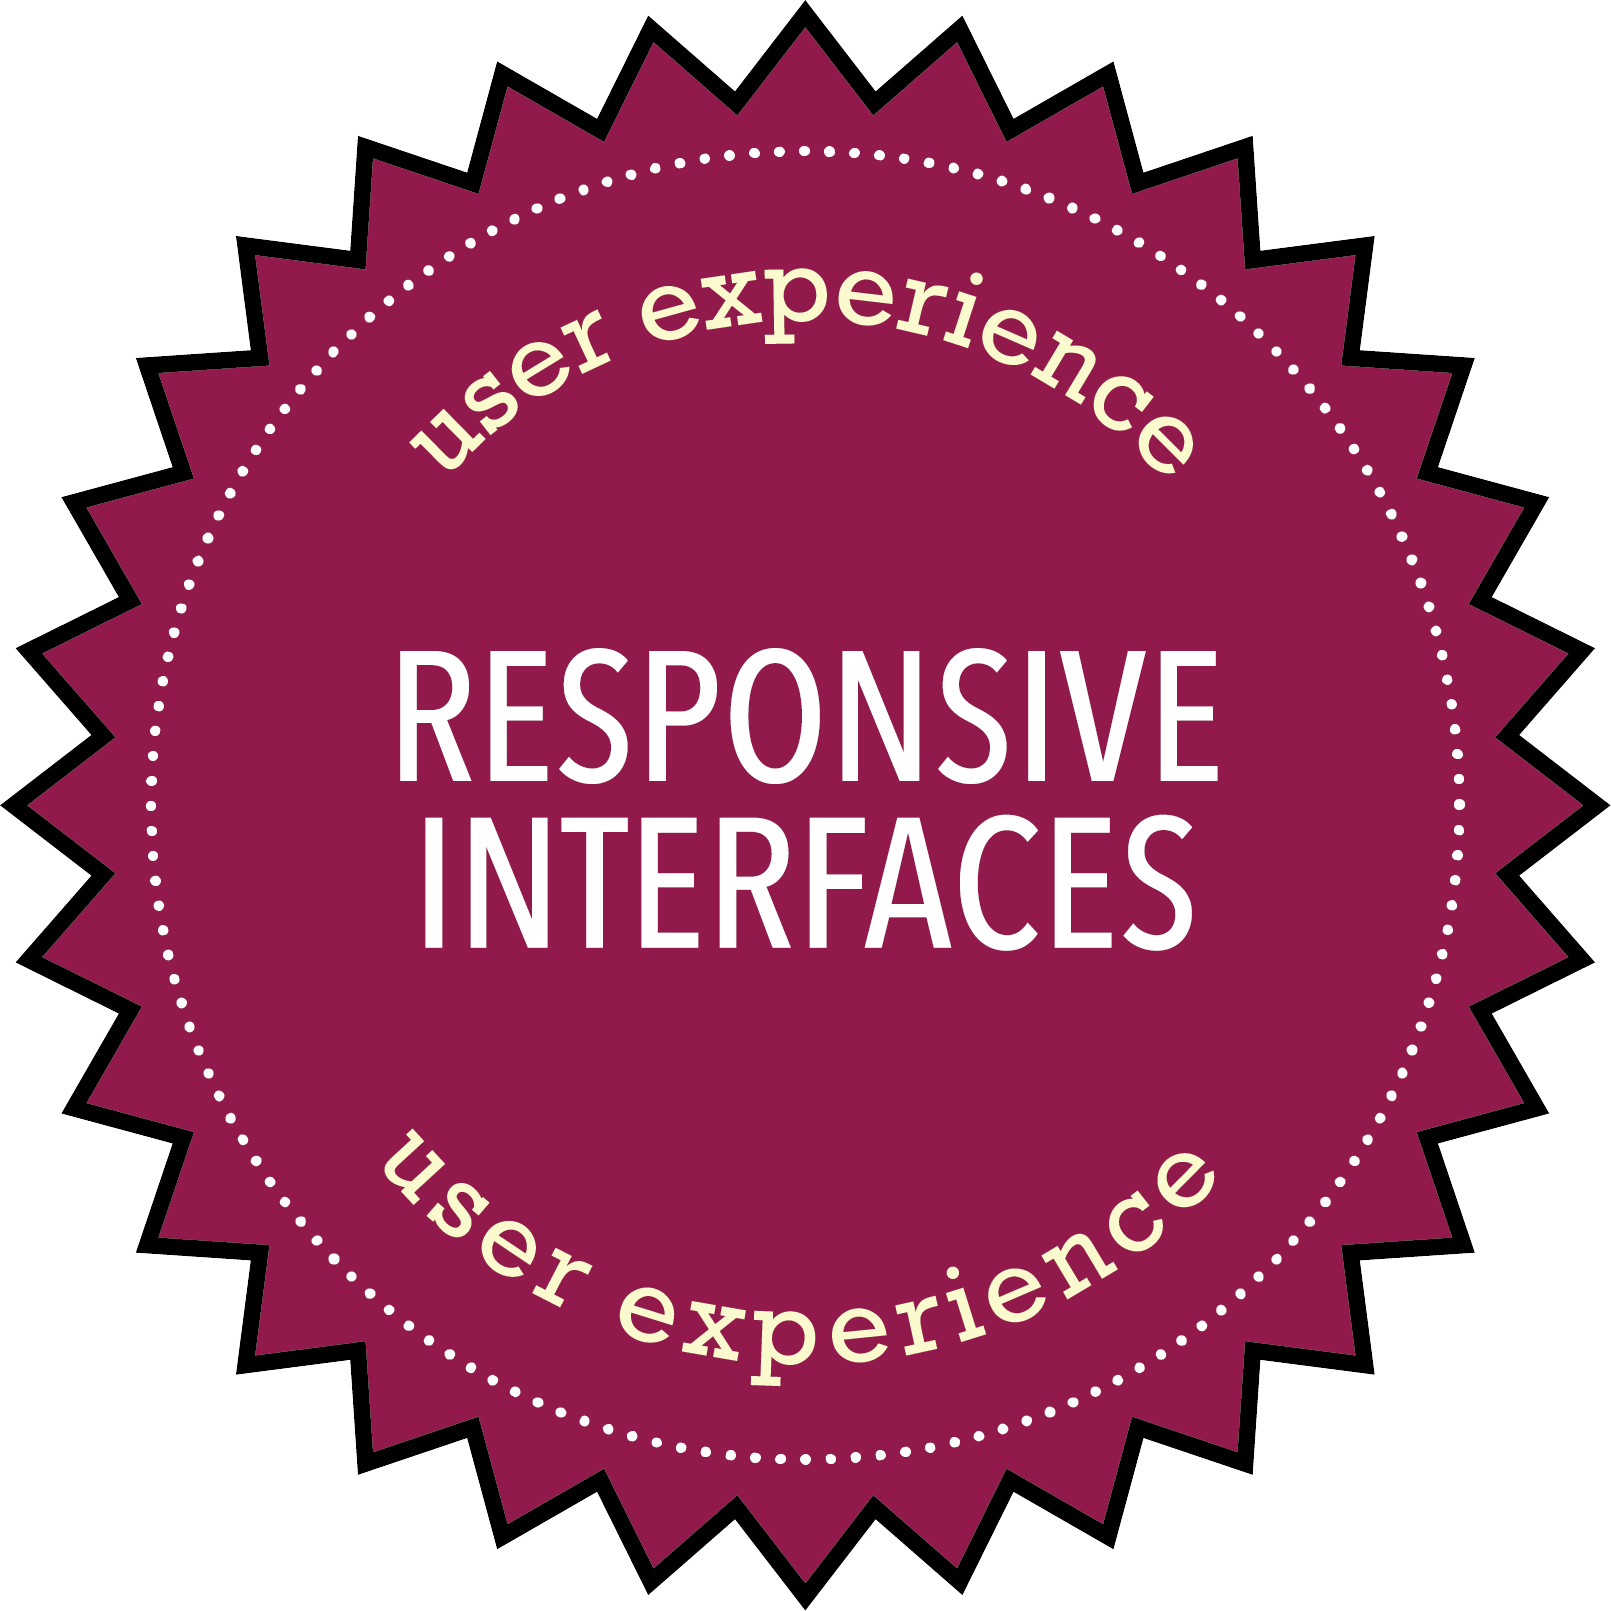 Empowered User Mobile Interfaces